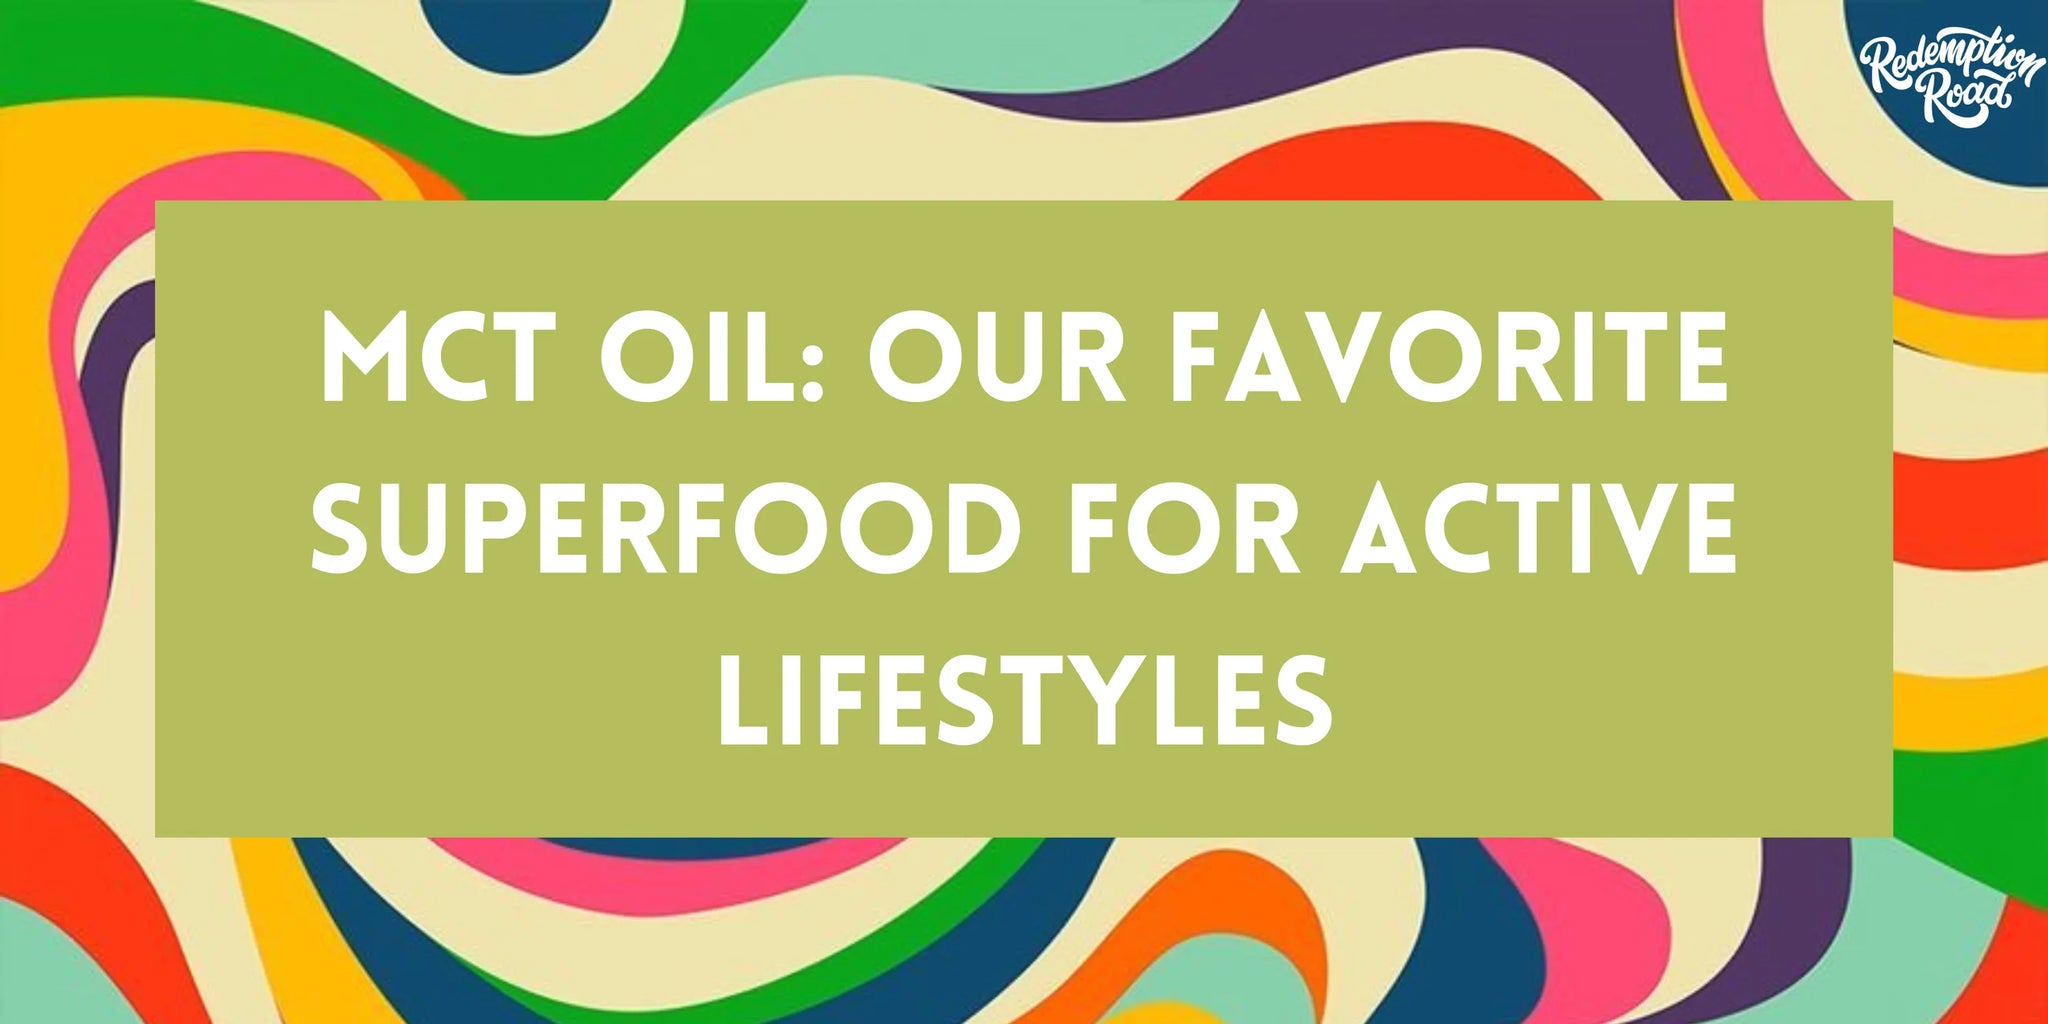 MCT Oil: Our Favorite Superfood For Active Lifestyles